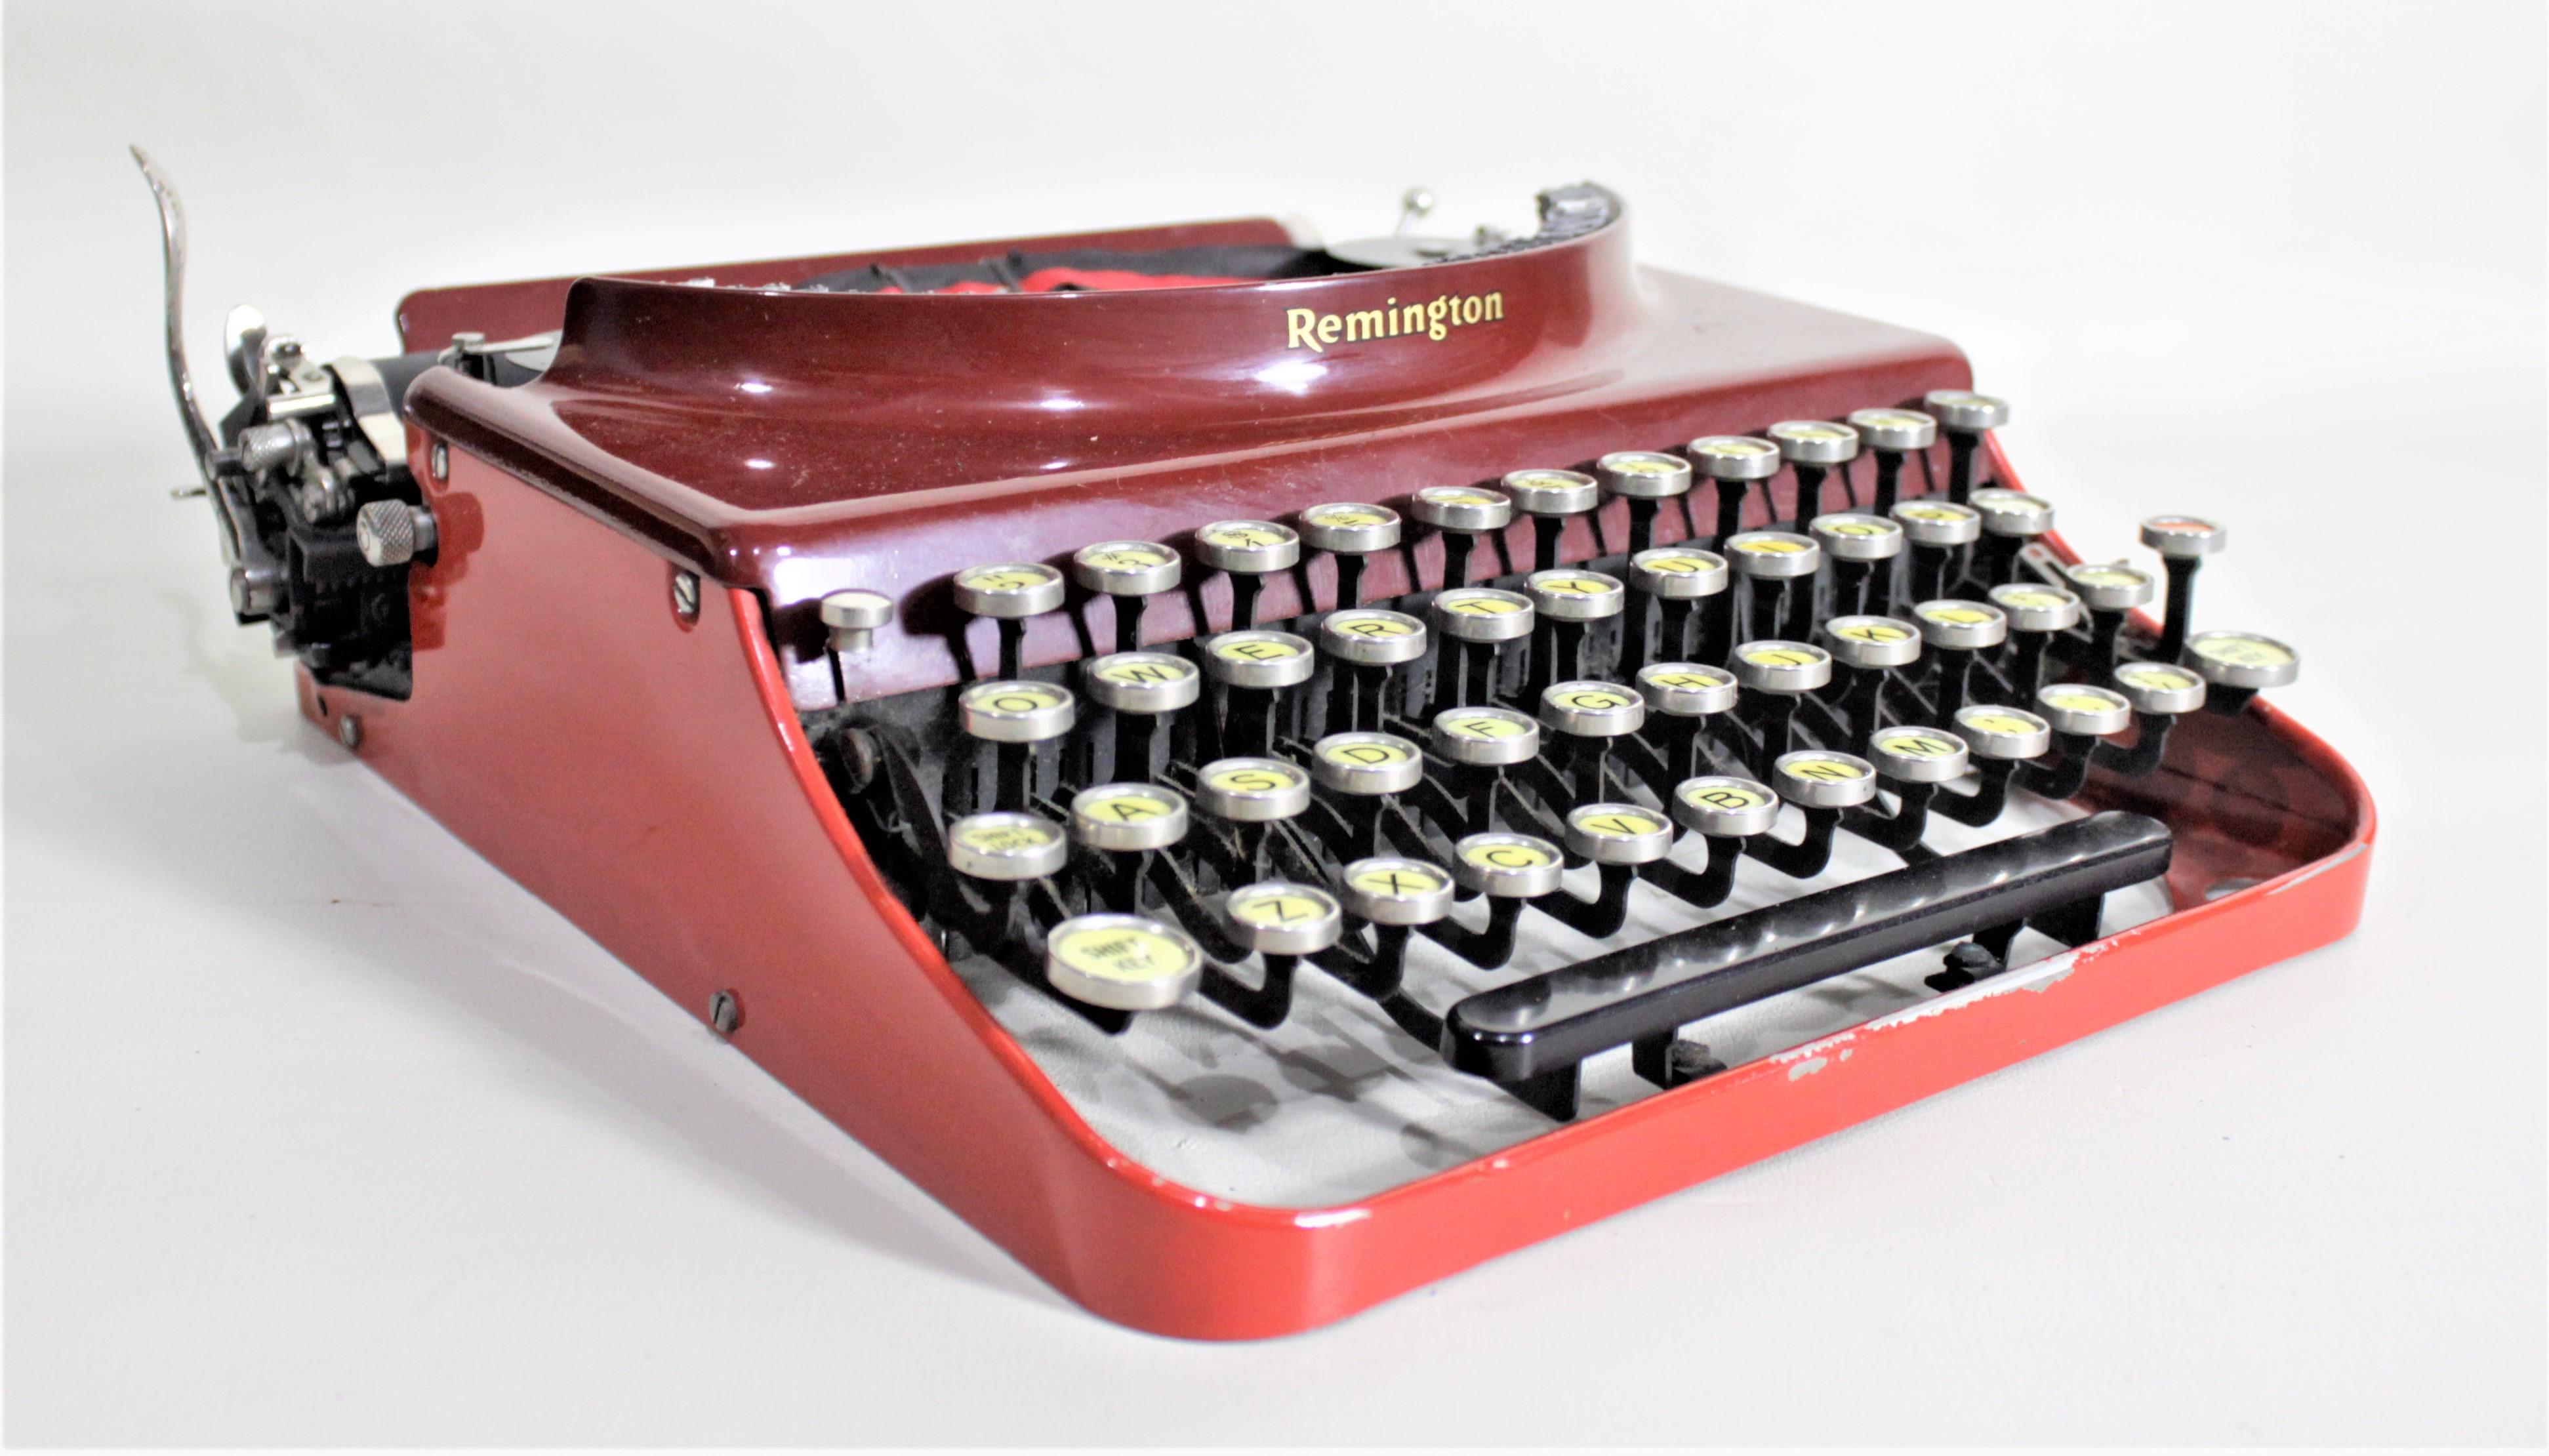 20th Century Art Deco Red Remington Rand No. 3 Streamlined Portable Typewriter with Hard Case